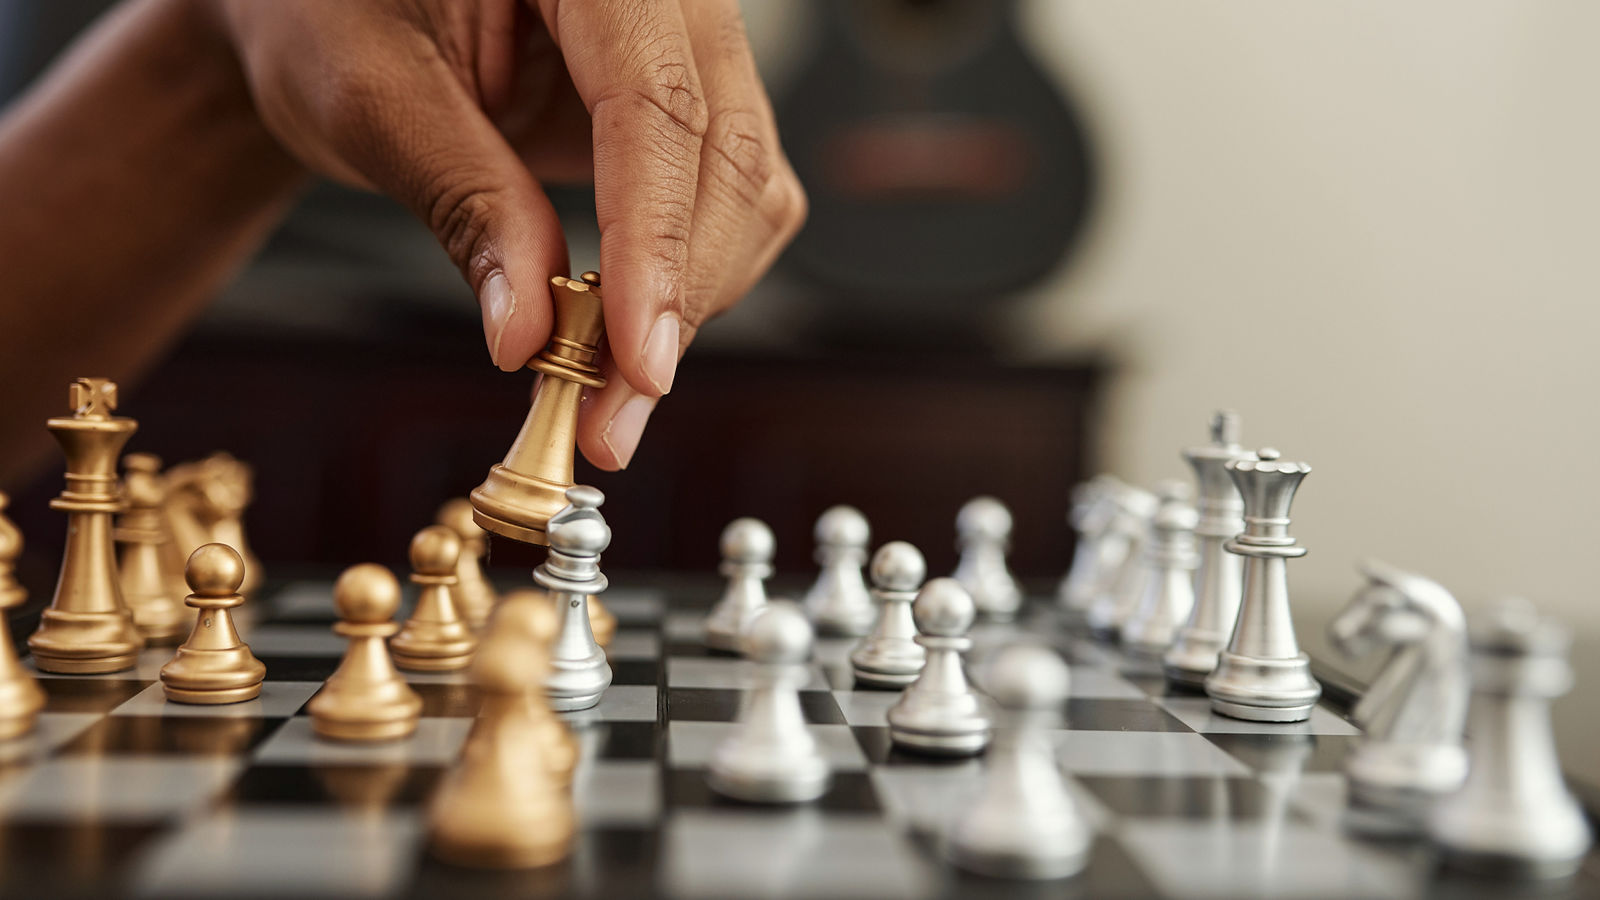 AI could identify anonymous chess players and pose a privacy risk - GIGAZINE